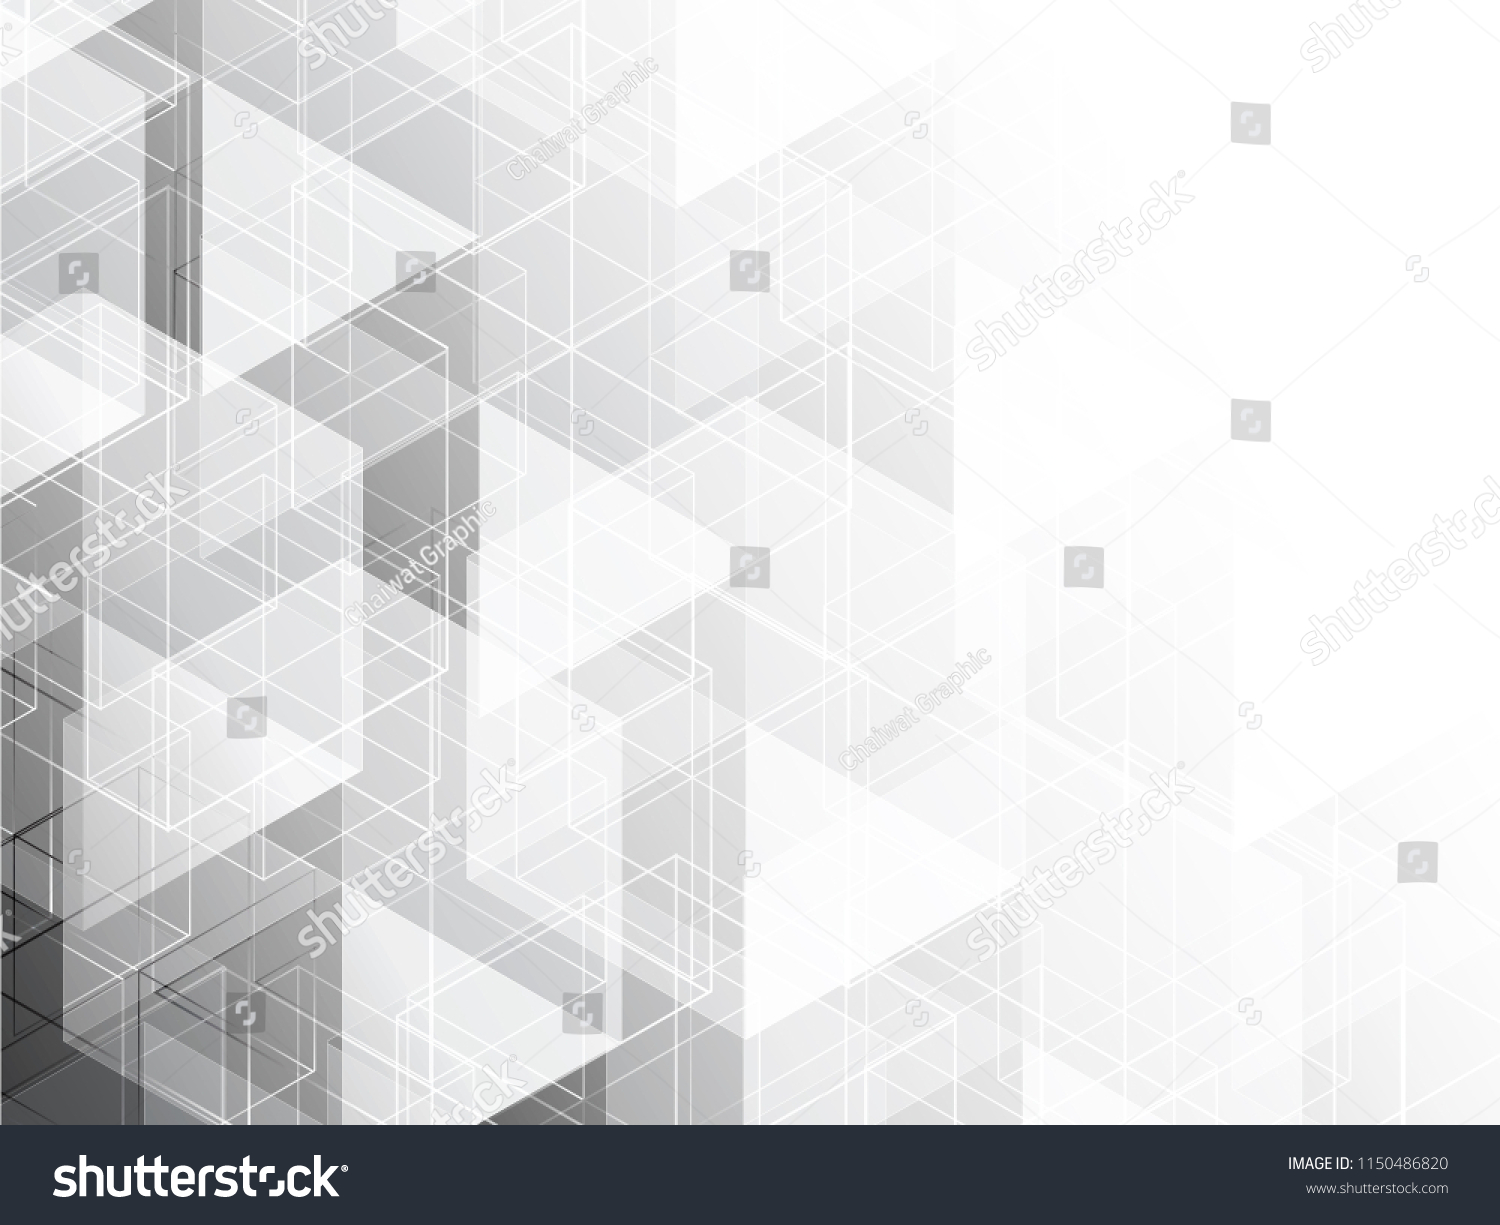 Abstract geometric white and gray with space modern design on Light gray background, vector illustration #1150486820